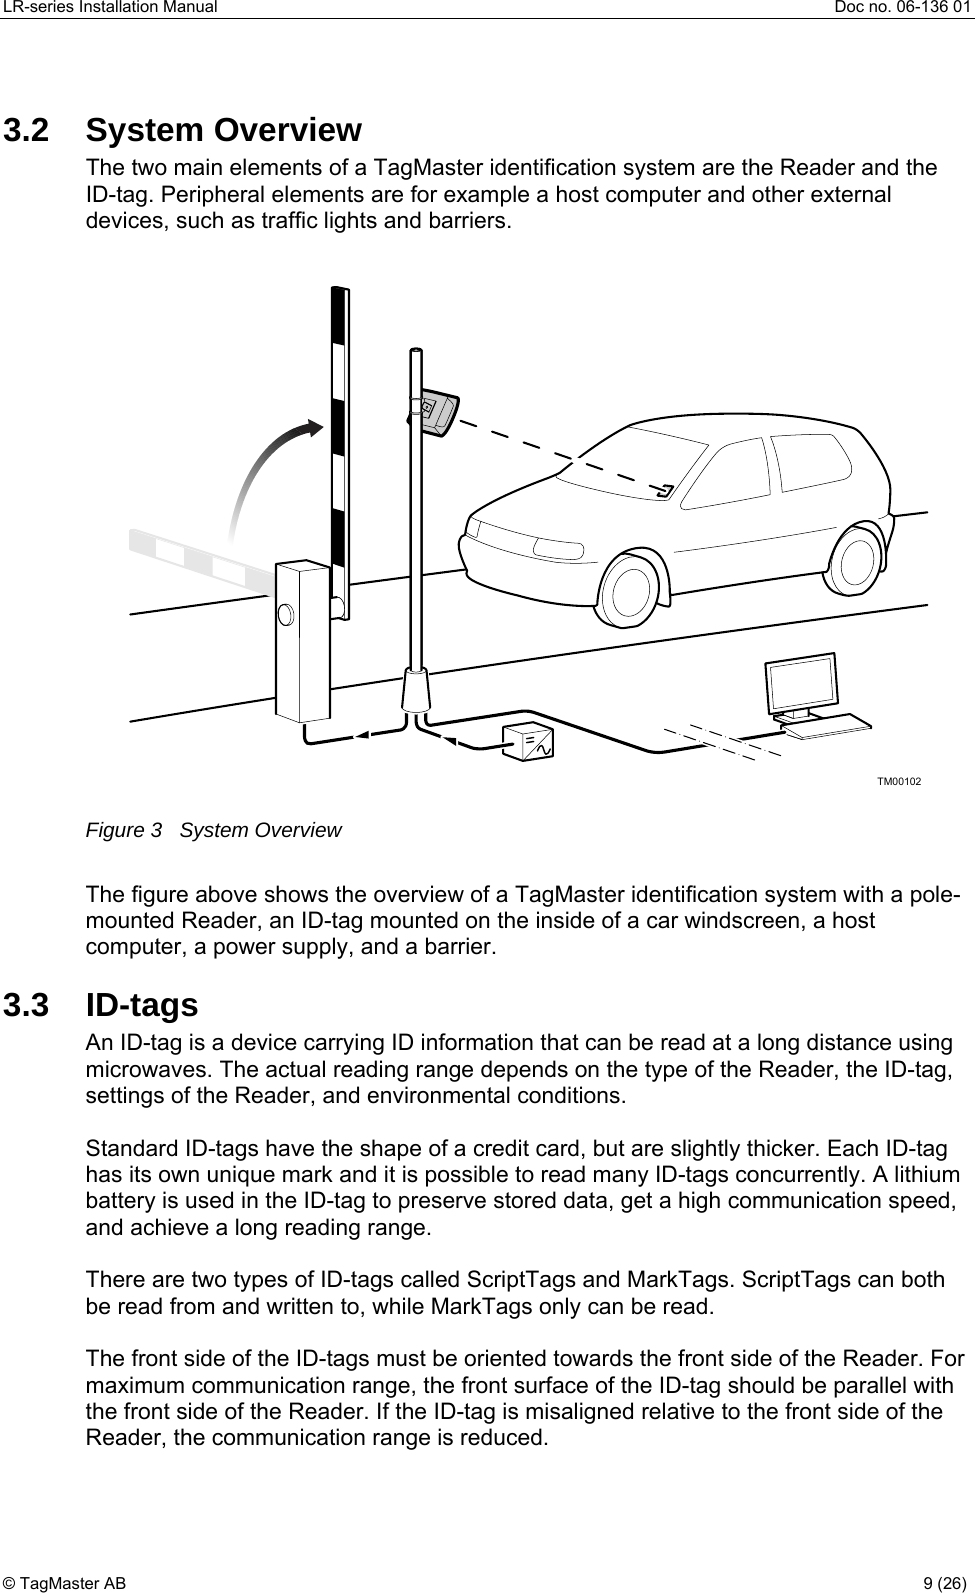 LR-series Installation Manual  Doc no. 06-136 01 3.2 System Overview The two main elements of a TagMaster identification system are the Reader and the ID-tag. Peripheral elements are for example a host computer and other external devices, such as traffic lights and barriers.      TM00102 Figure 3   System Overview  The figure above shows the overview of a TagMaster identification system with a pole-mounted Reader, an ID-tag mounted on the inside of a car windscreen, a host computer, a power supply, and a barrier. 3.3 ID-tags An ID-tag is a device carrying ID information that can be read at a long distance using microwaves. The actual reading range depends on the type of the Reader, the ID-tag, settings of the Reader, and environmental conditions.   Standard ID-tags have the shape of a credit card, but are slightly thicker. Each ID-tag has its own unique mark and it is possible to read many ID-tags concurrently. A lithium battery is used in the ID-tag to preserve stored data, get a high communication speed, and achieve a long reading range.   There are two types of ID-tags called ScriptTags and MarkTags. ScriptTags can both be read from and written to, while MarkTags only can be read.  The front side of the ID-tags must be oriented towards the front side of the Reader. For maximum communication range, the front surface of the ID-tag should be parallel with the front side of the Reader. If the ID-tag is misaligned relative to the front side of the Reader, the communication range is reduced. © TagMaster AB  9 (26)   